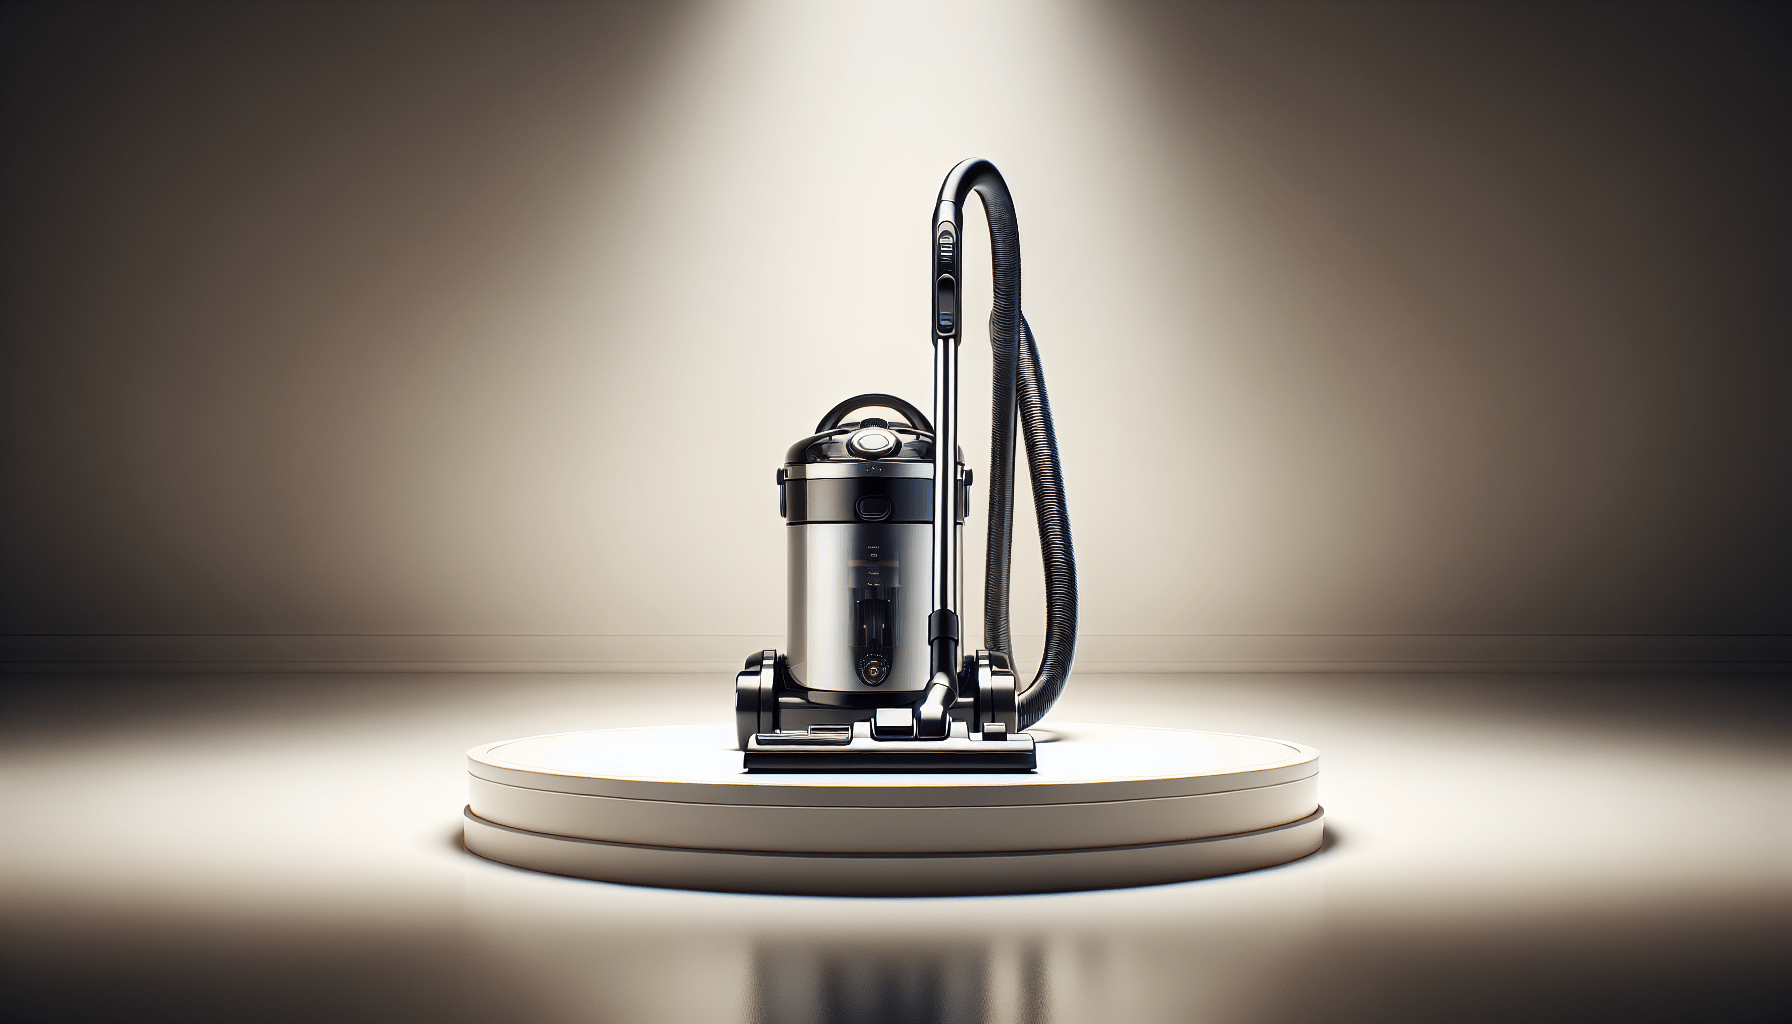 Why Is Dyson Vacuum So Much Better Vacuums Reviews Blog